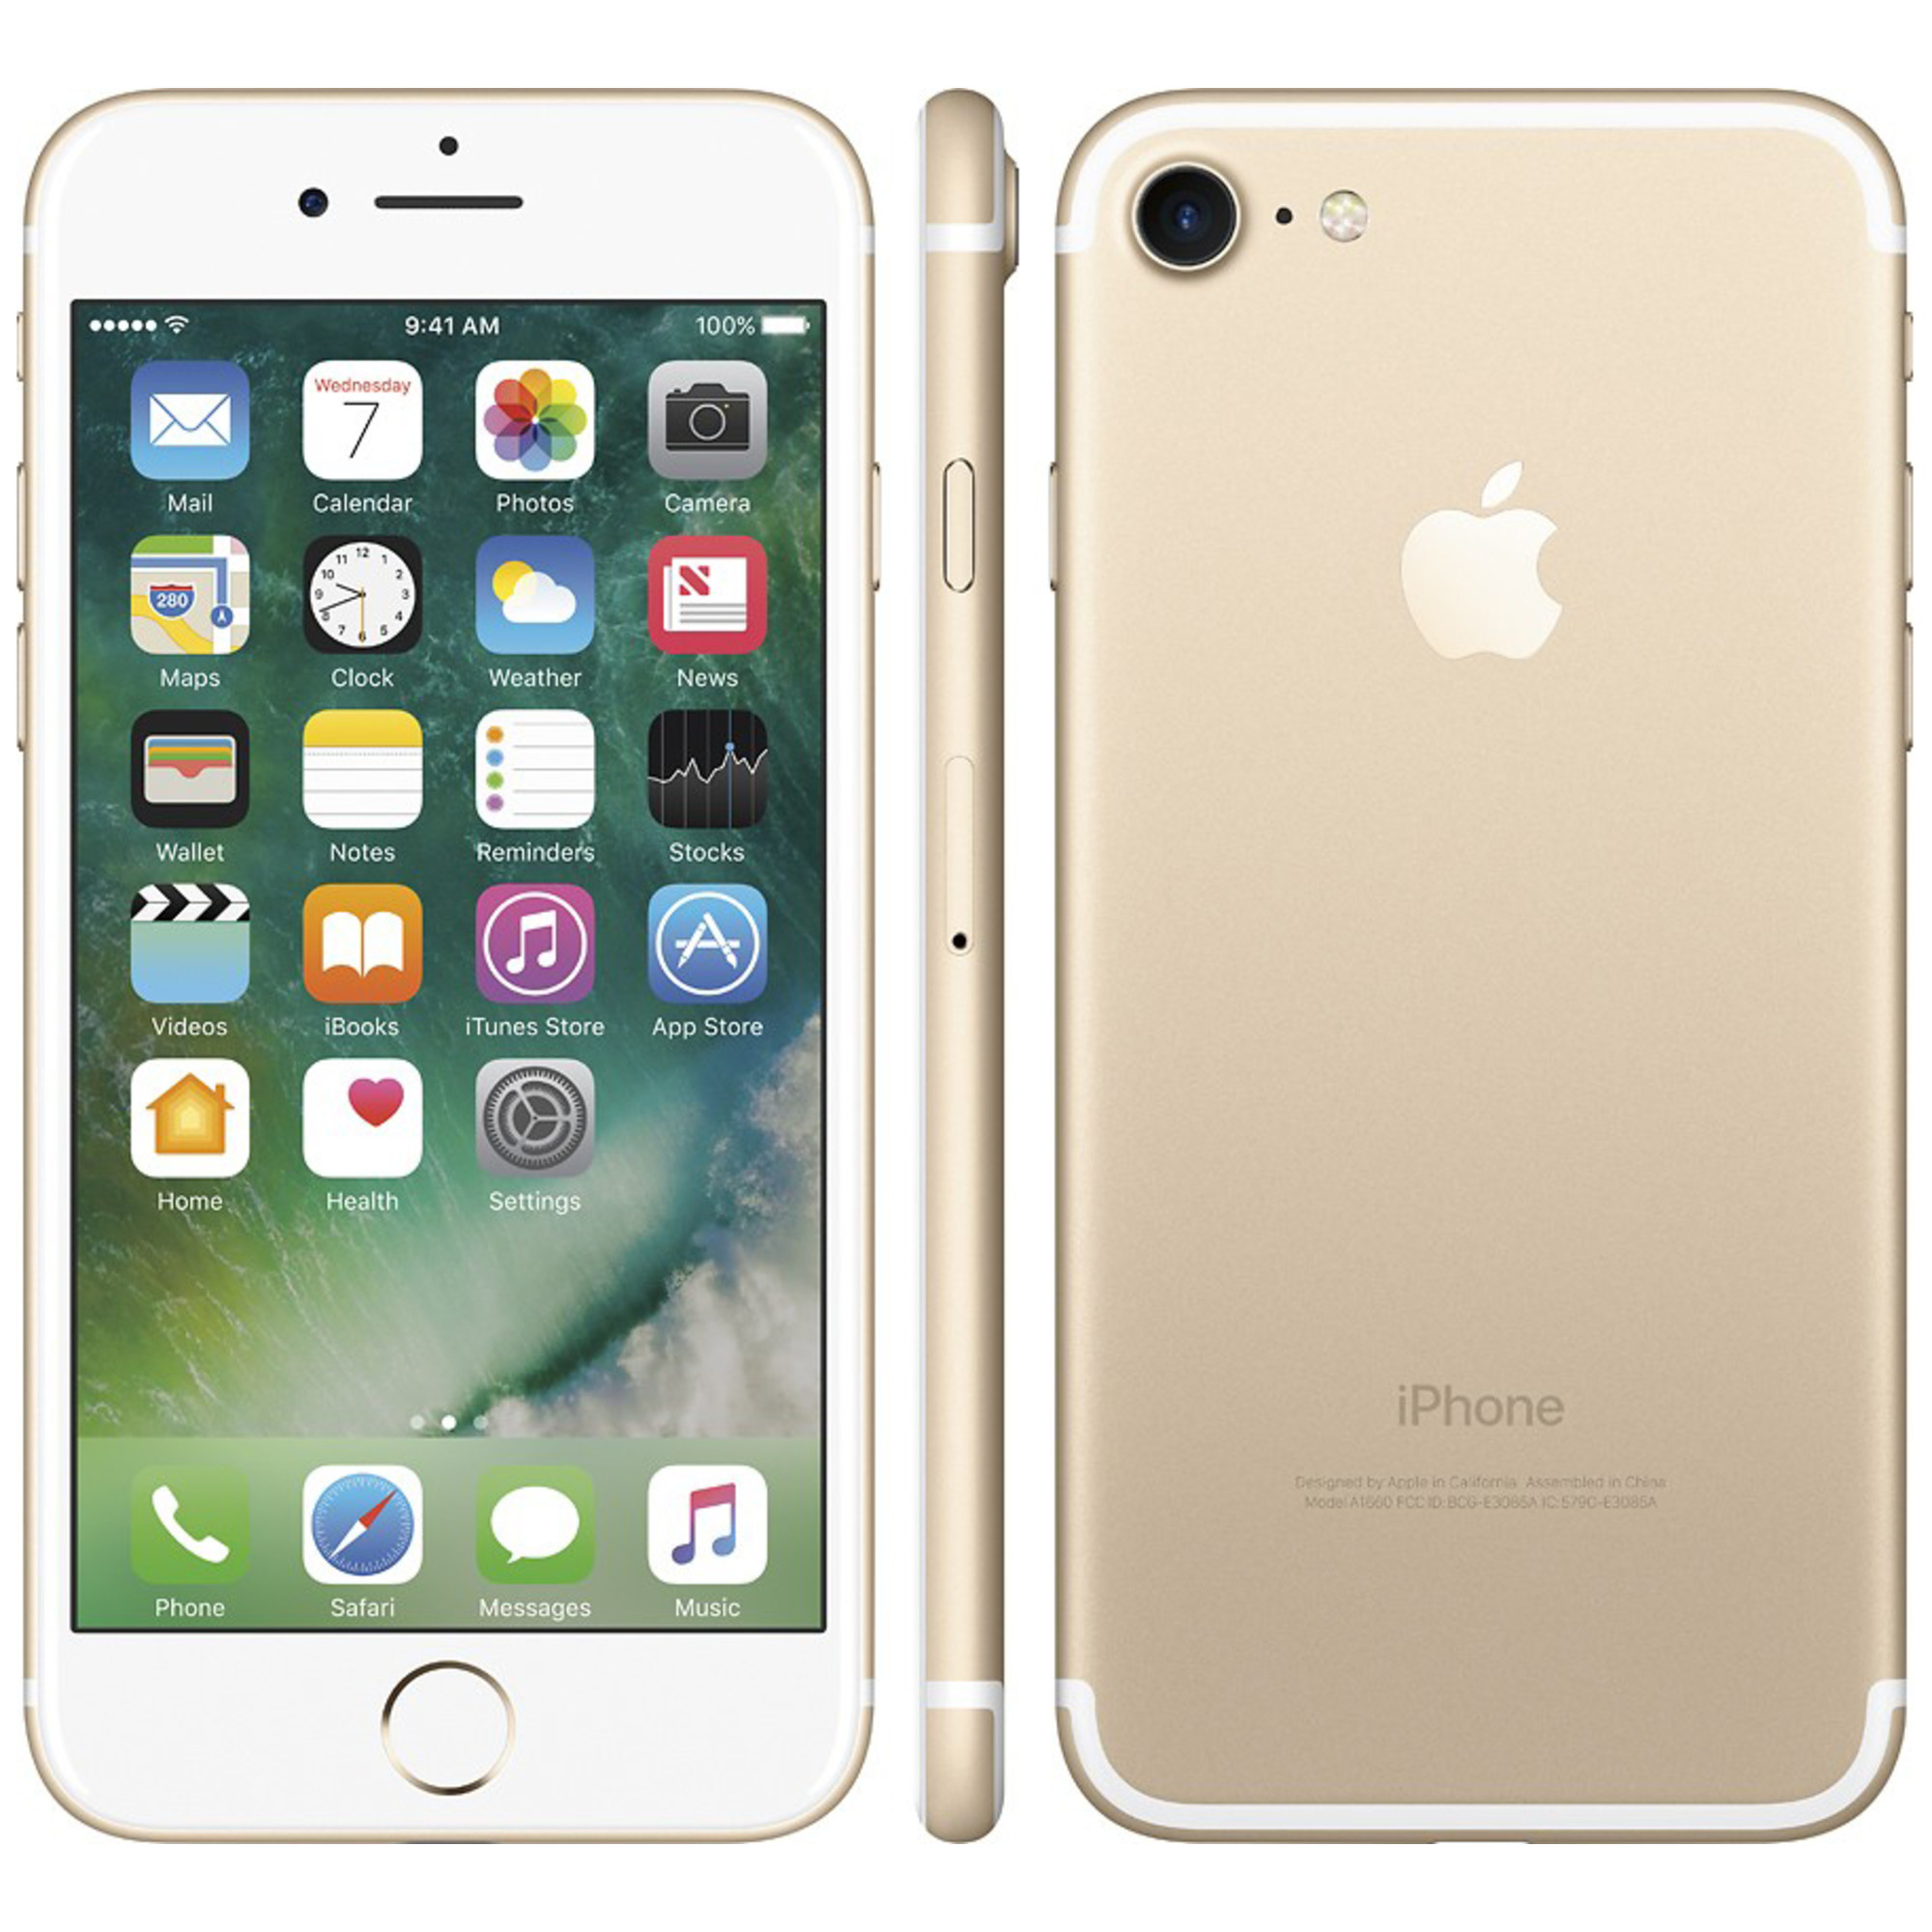 Pre-Owned Apple iPhone 7 128GB Gold Fully Unlocked (Verizon + AT&T + T-Mobile + Sprint) - (Refurbished: Good) - image 4 of 5